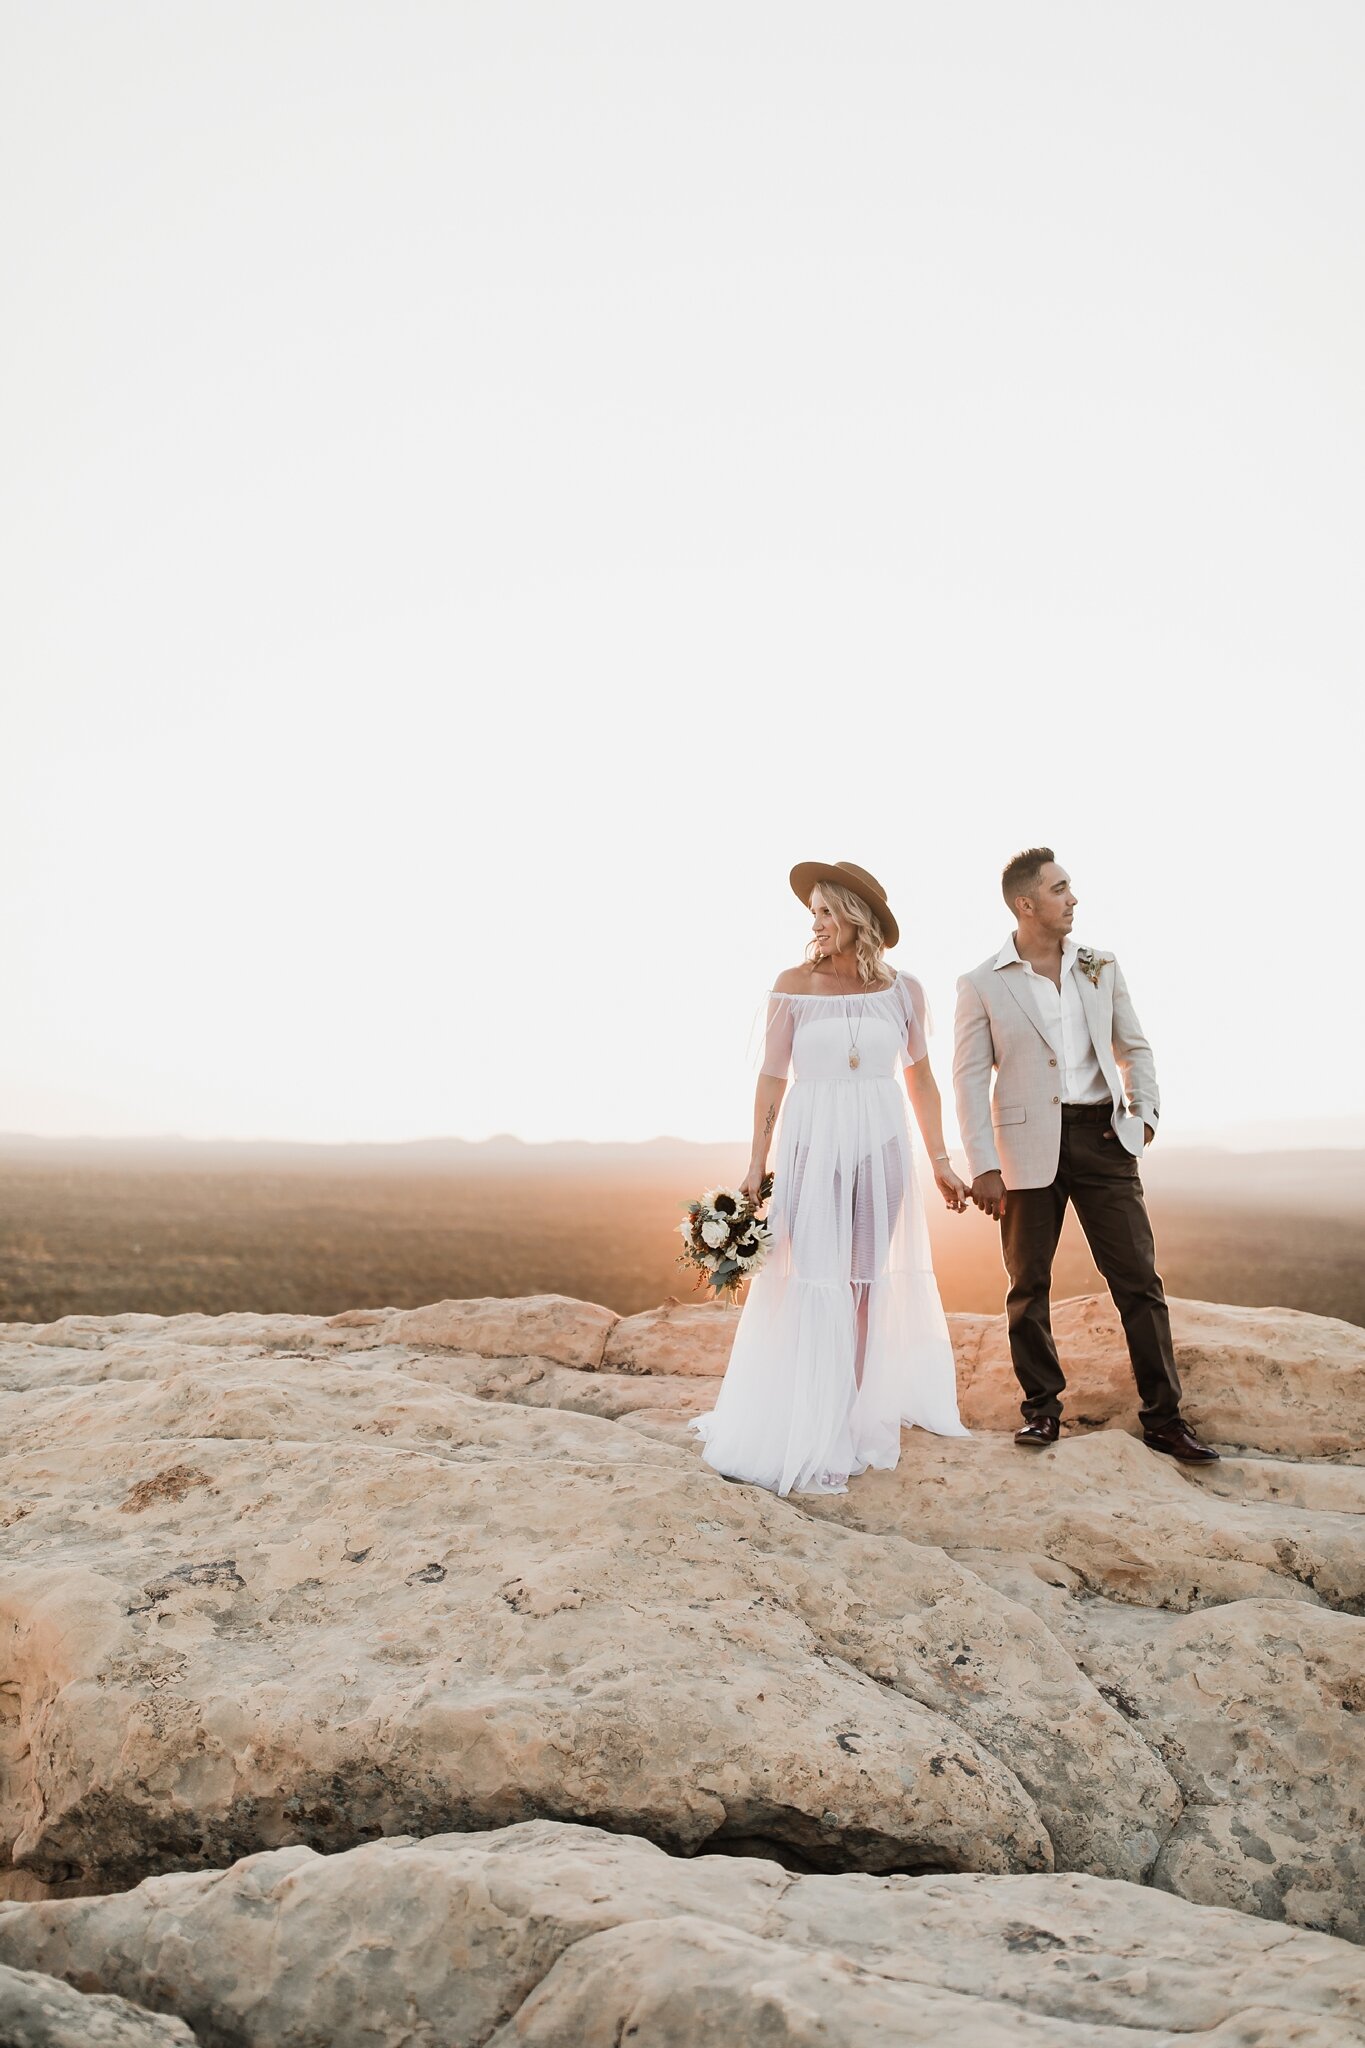 Alicia+lucia+photography+-+albuquerque+wedding+photographer+-+santa+fe+wedding+photography+-+new+mexico+wedding+photographer+-+new+mexico+wedding+-+anniversary+-+styled+anniversary+-+elopement+-+styled+elopement_0037.jpg